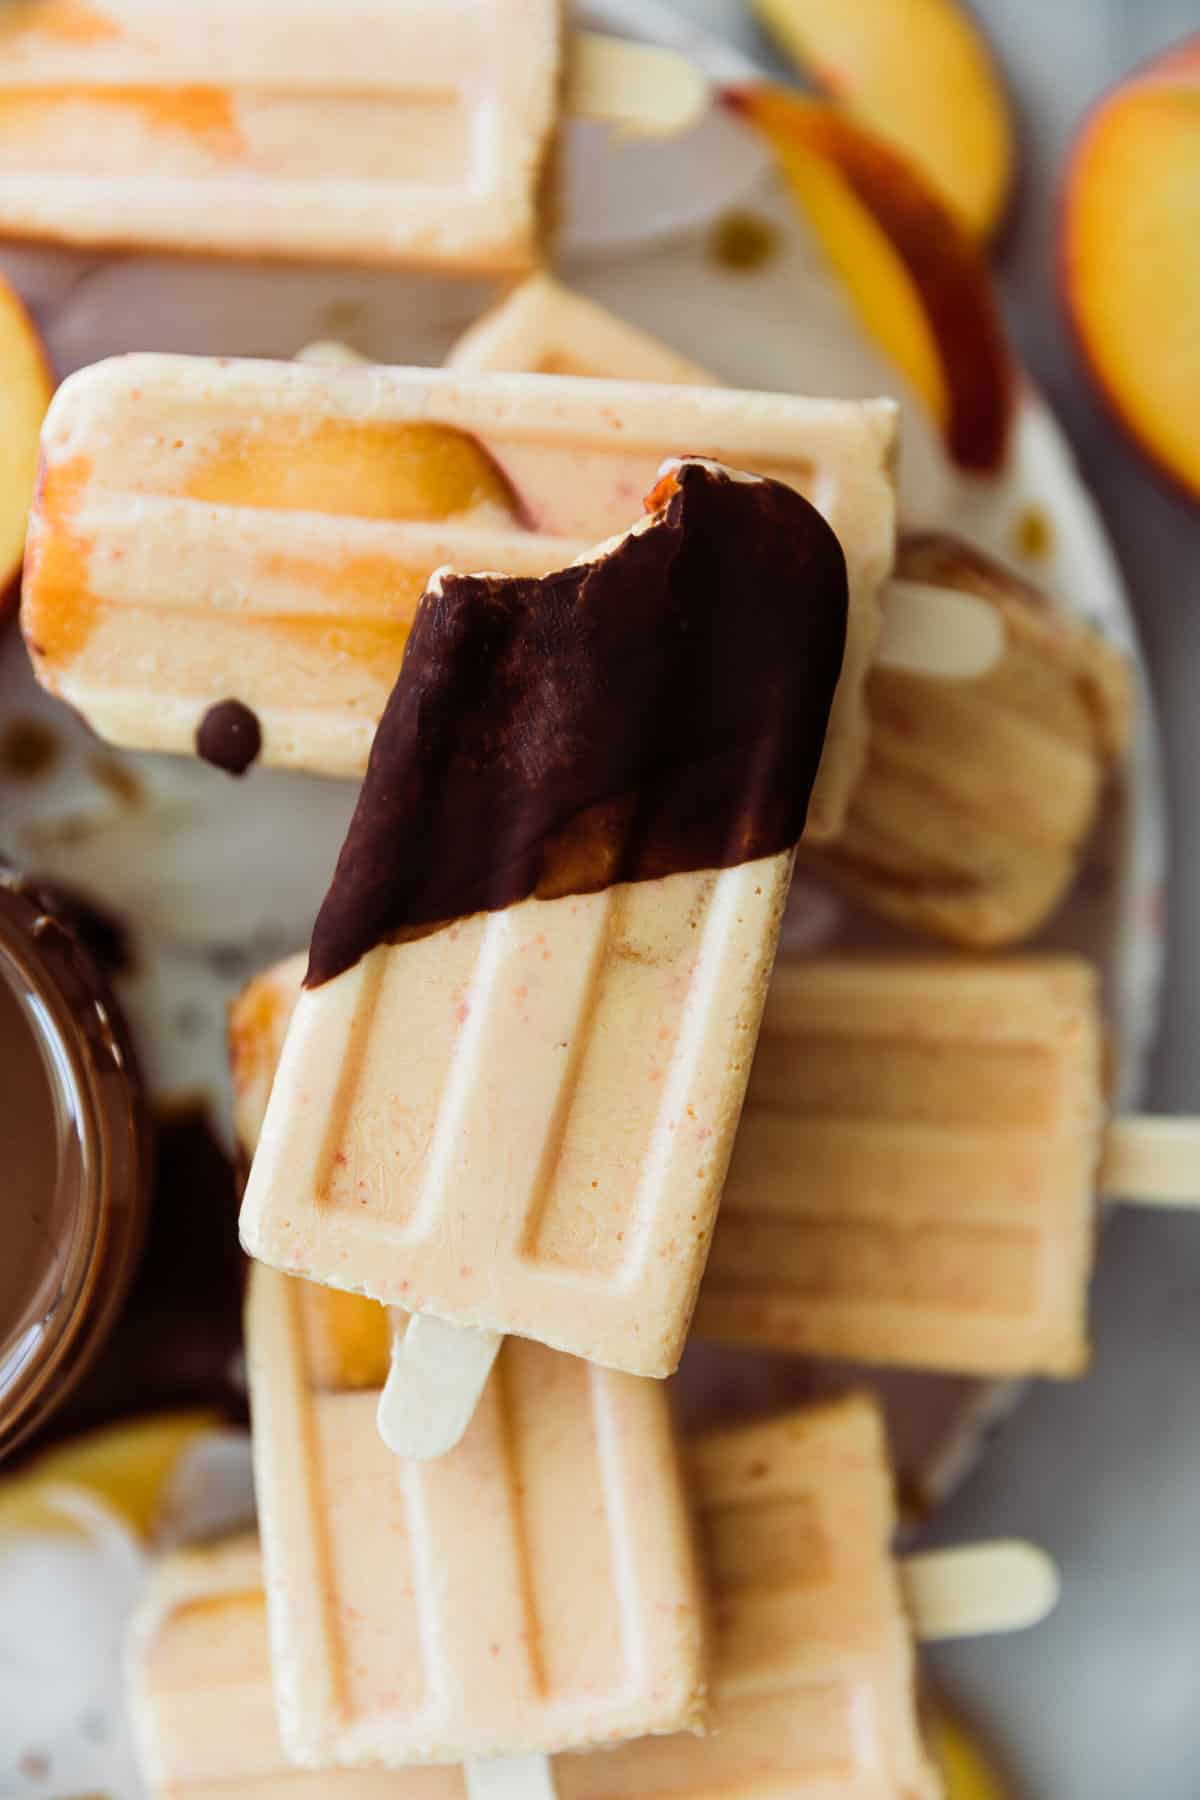 Peach popsicles on ice with one popsicle dipped in chocolate. 